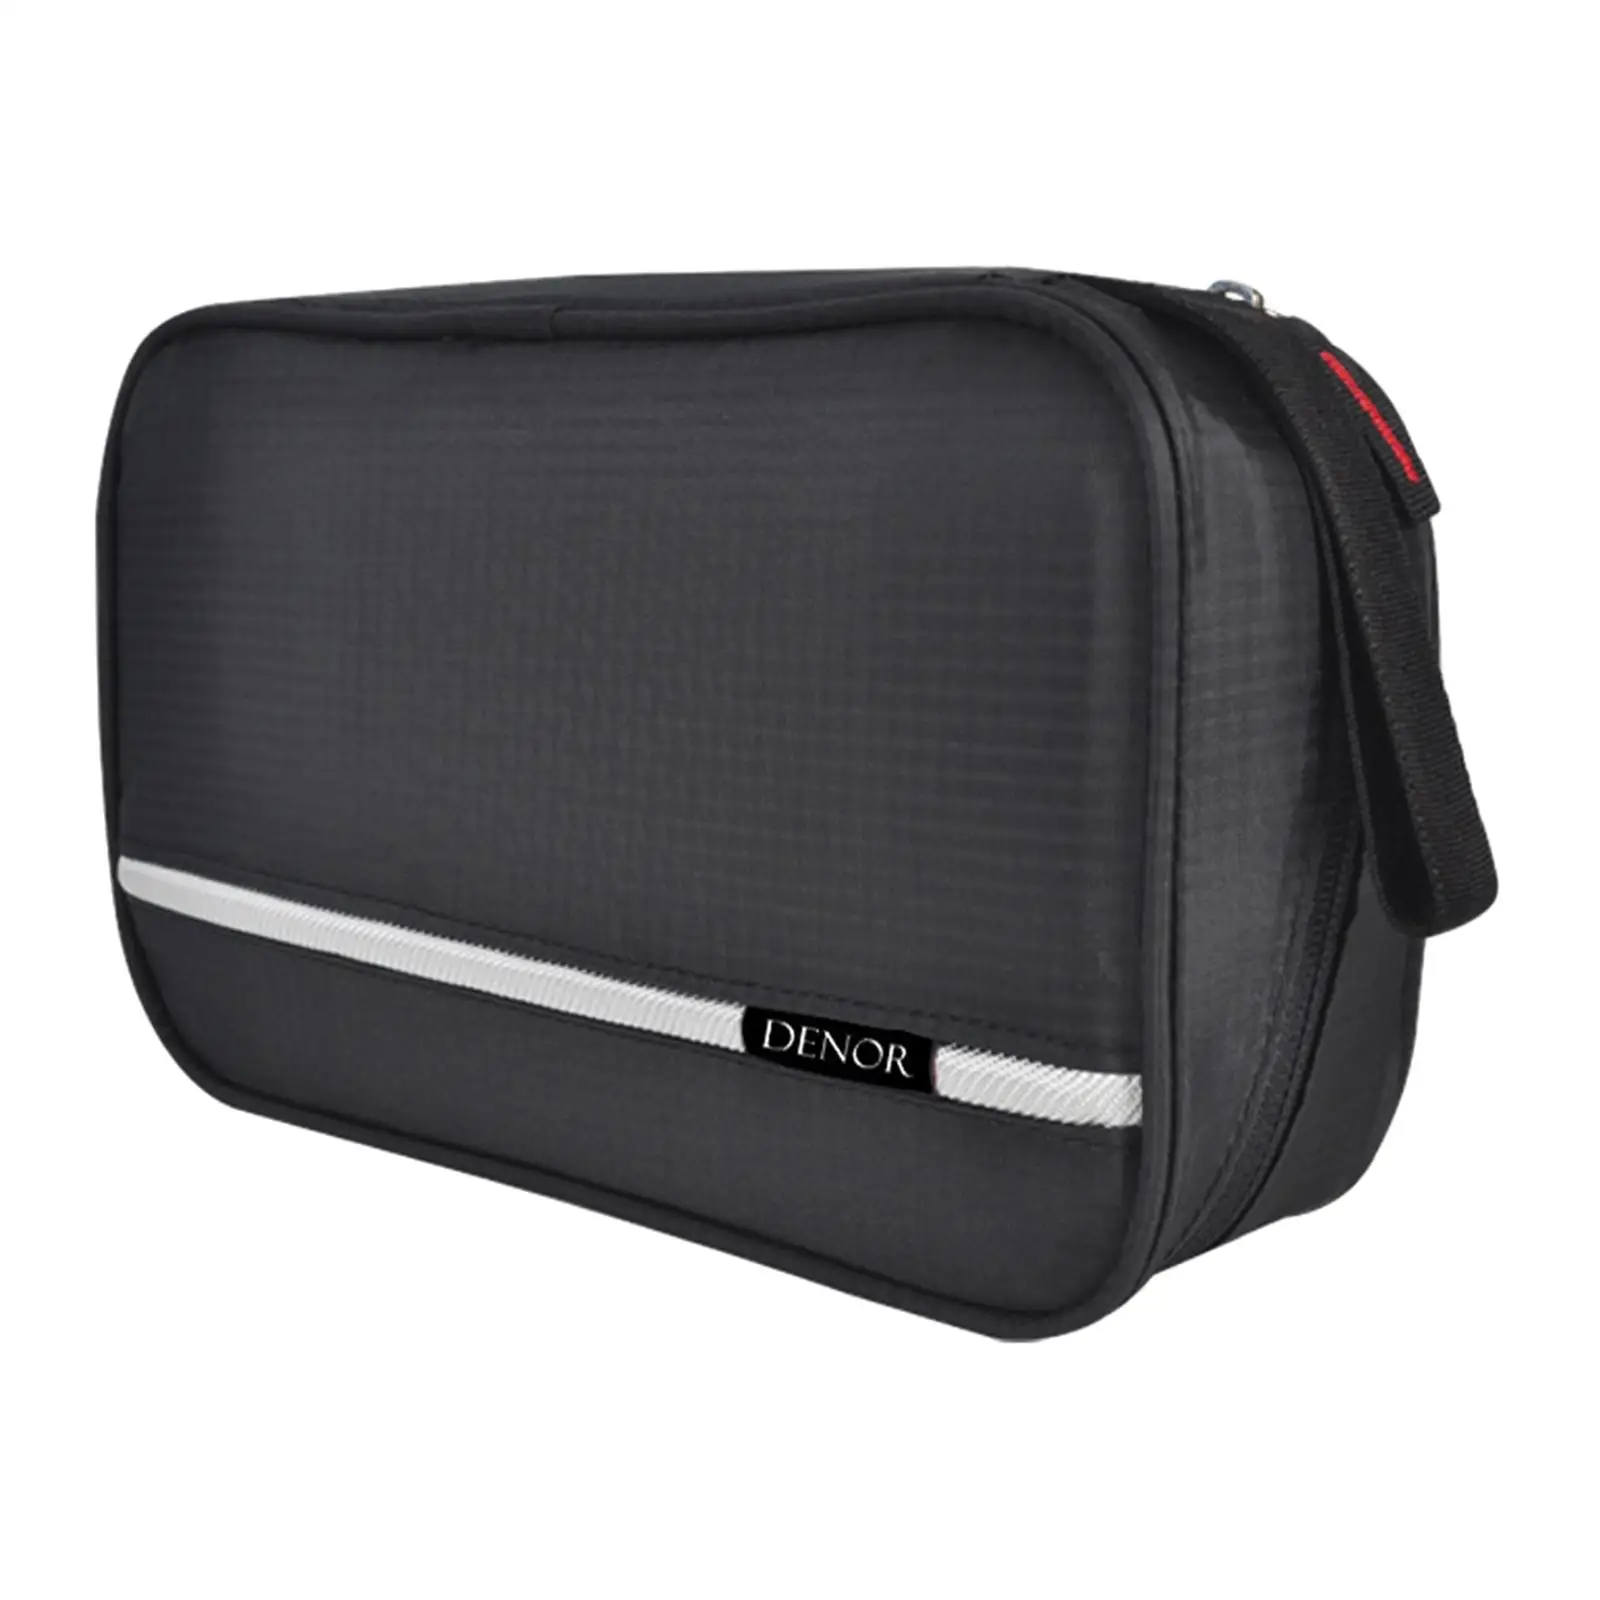 Hanging Travel Toiletry bag, wash Bag Large Toiletry Purse Holder Makeup Bag Foldable Durable for Unisex Adults